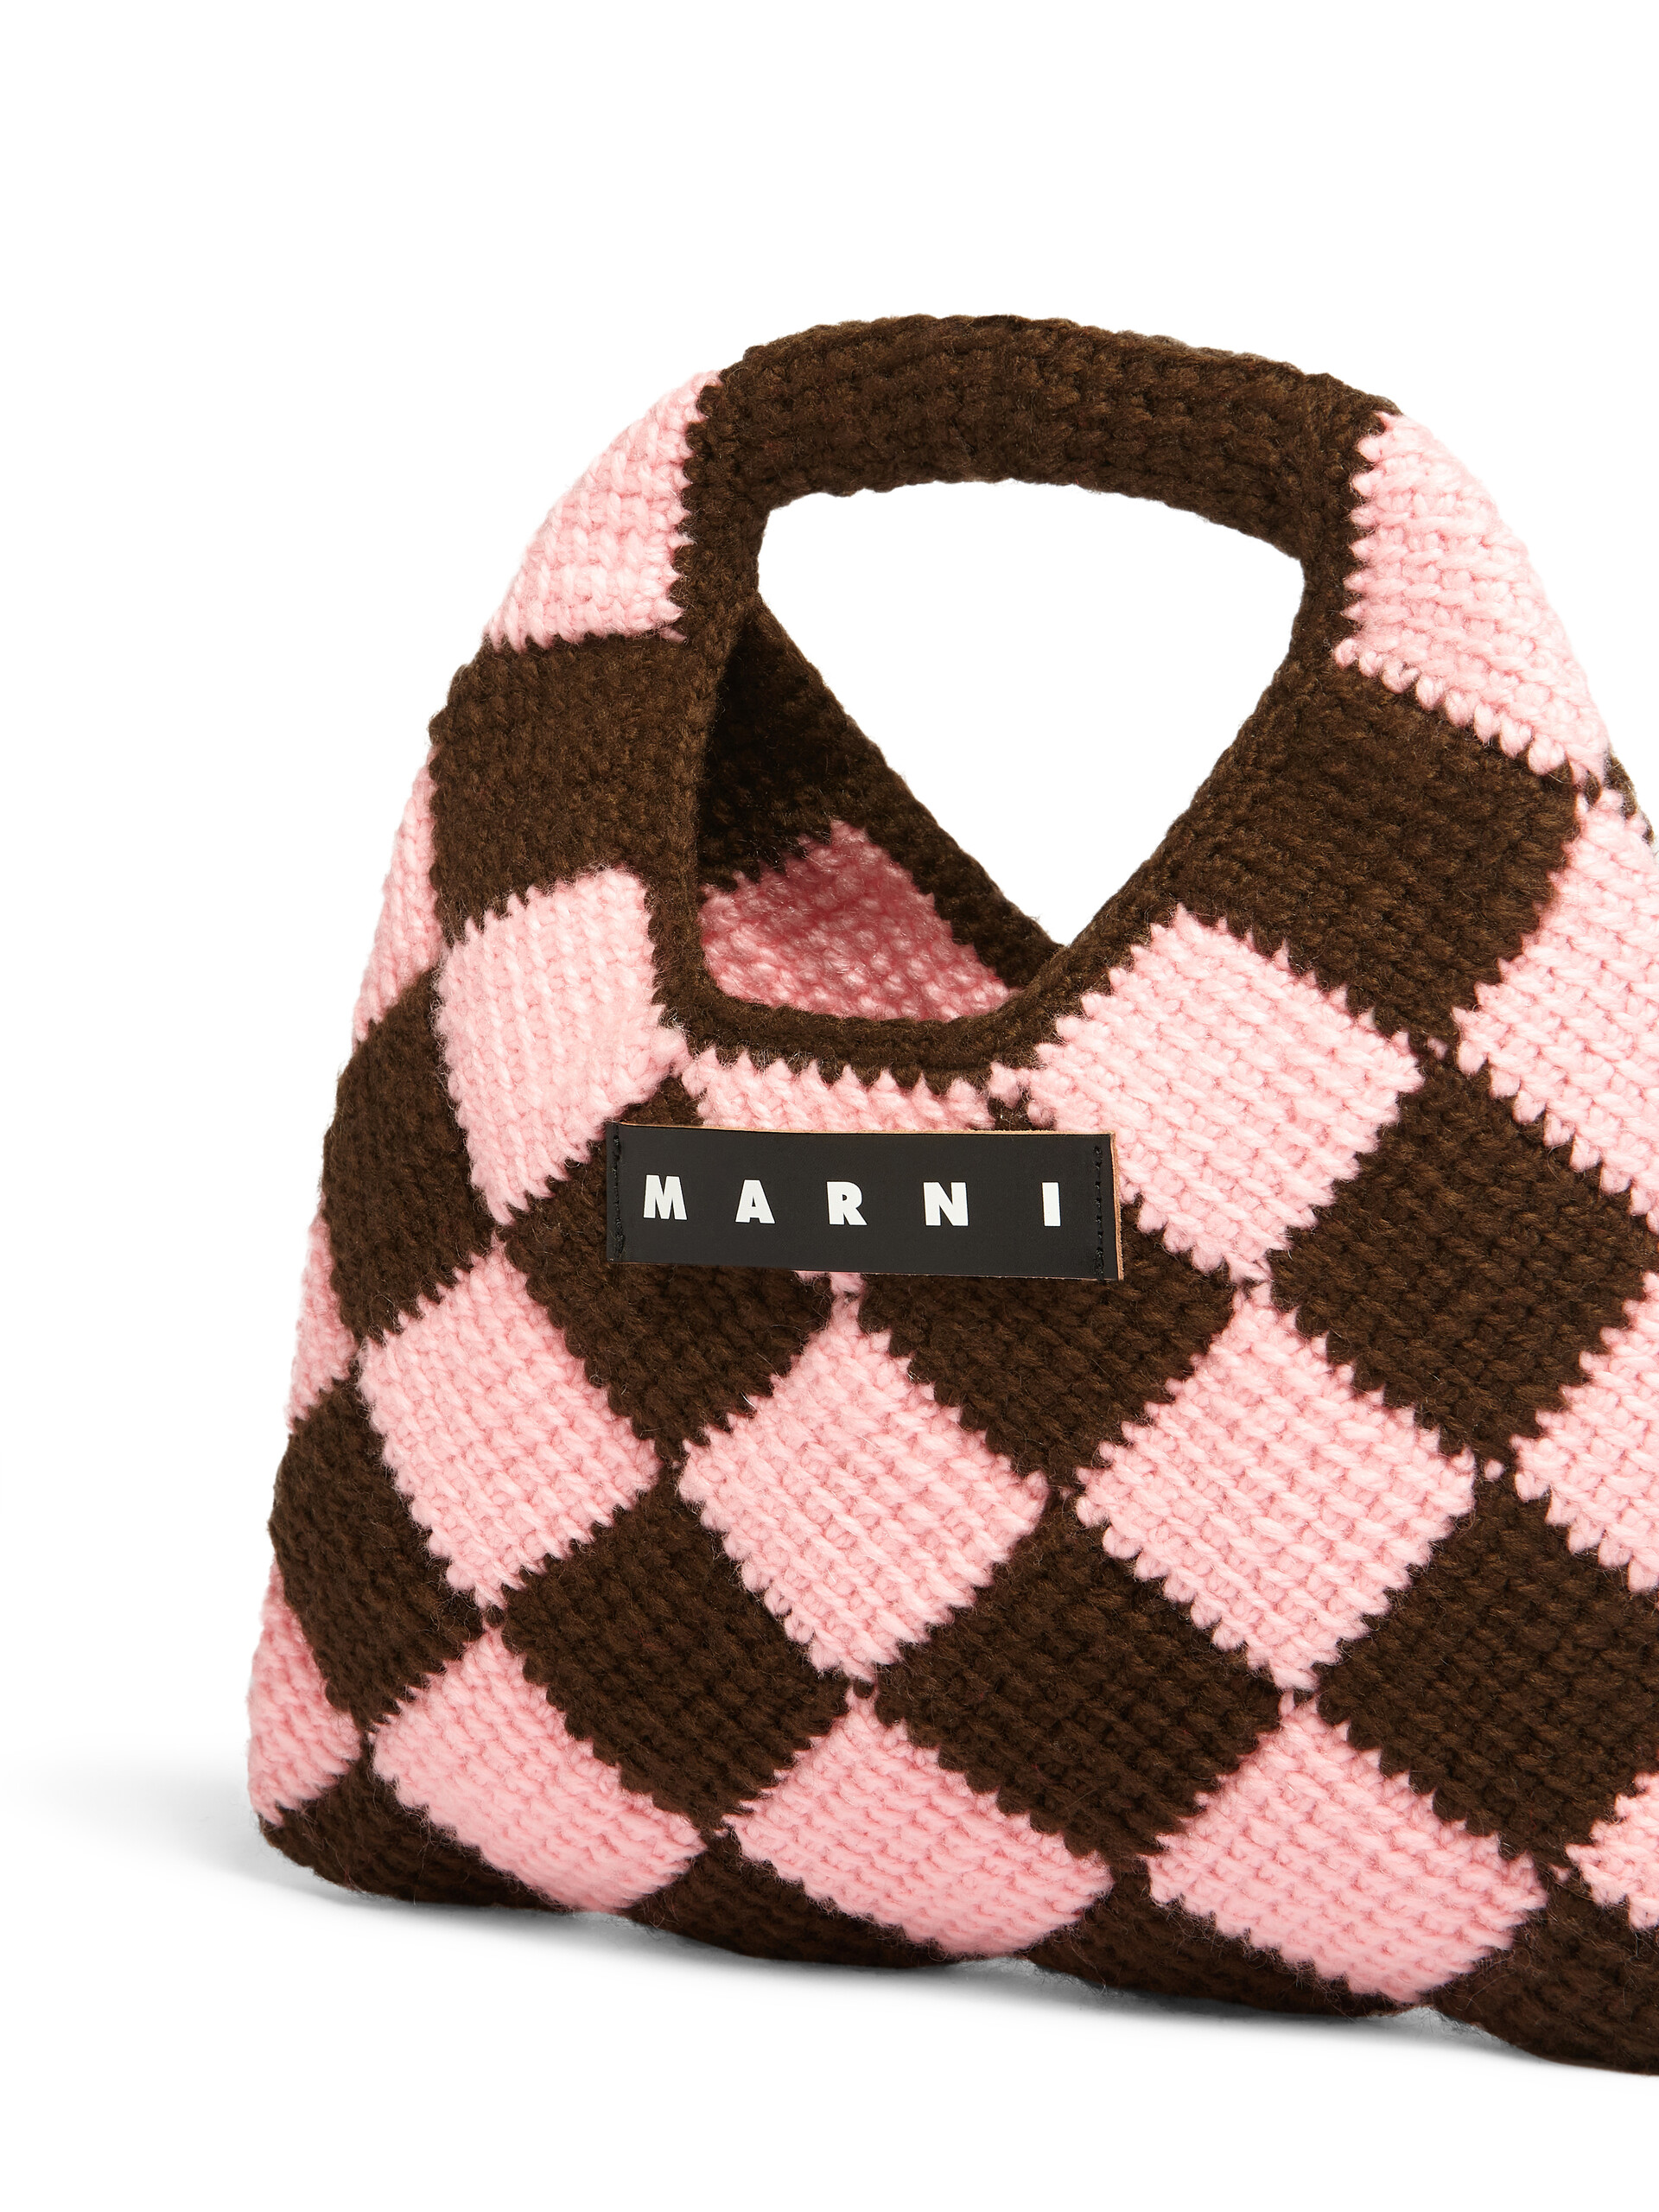 MARNI MARKET DIAMOND small bag in brown and pink tech wool - Bags - Image 4